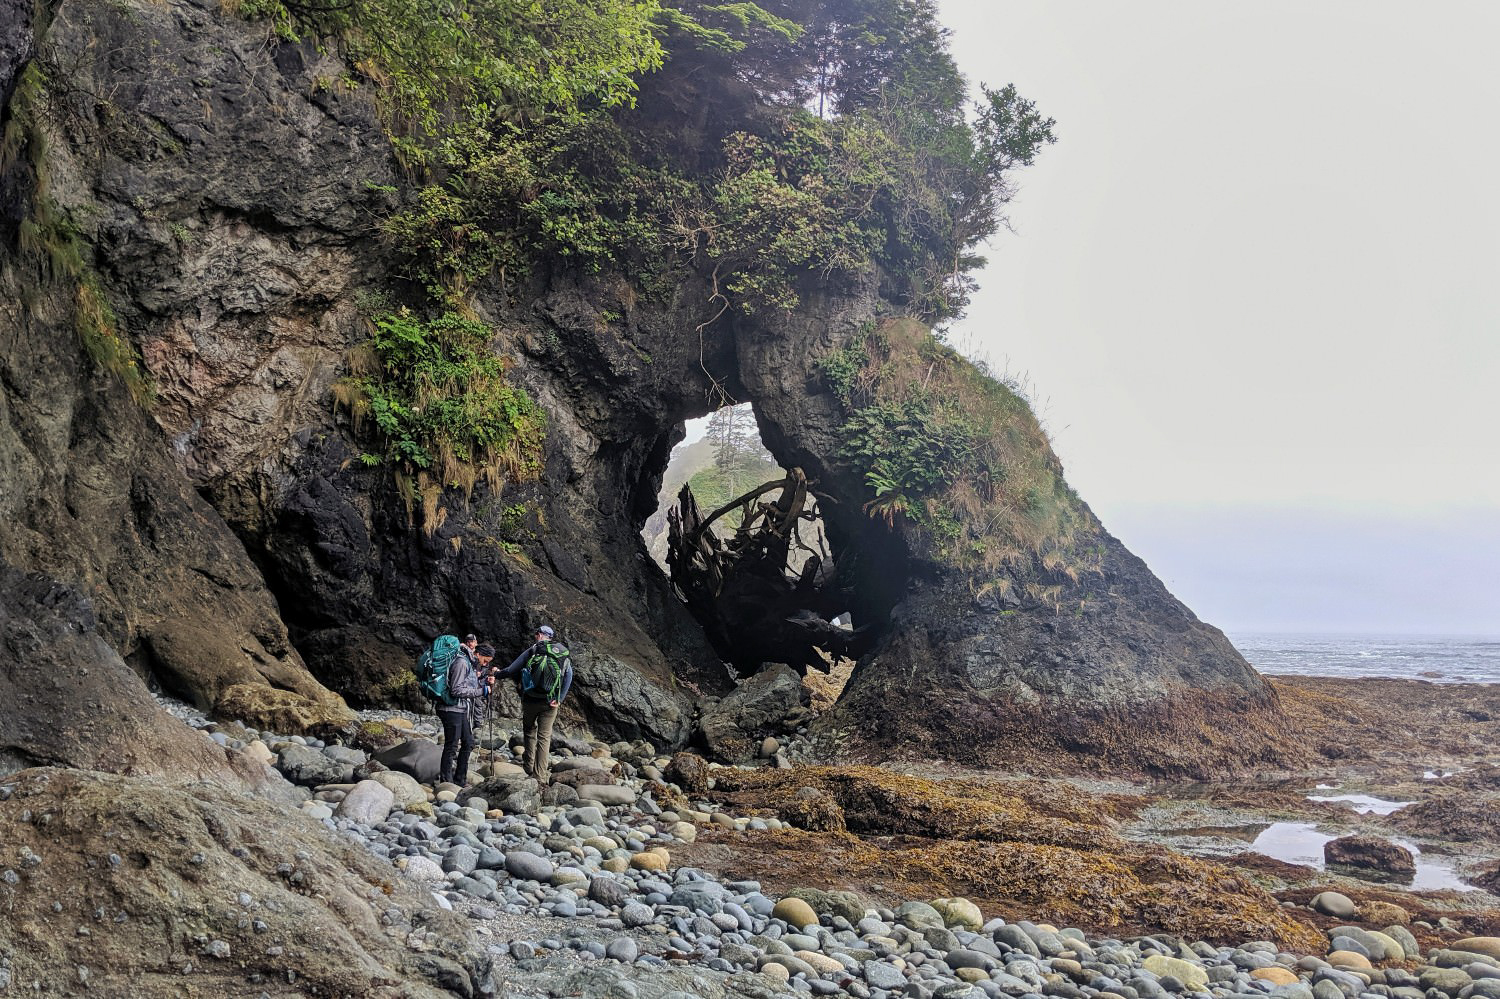 North Coast Route Backpacking Guide - IMG 20190617 103420 01 1500x999